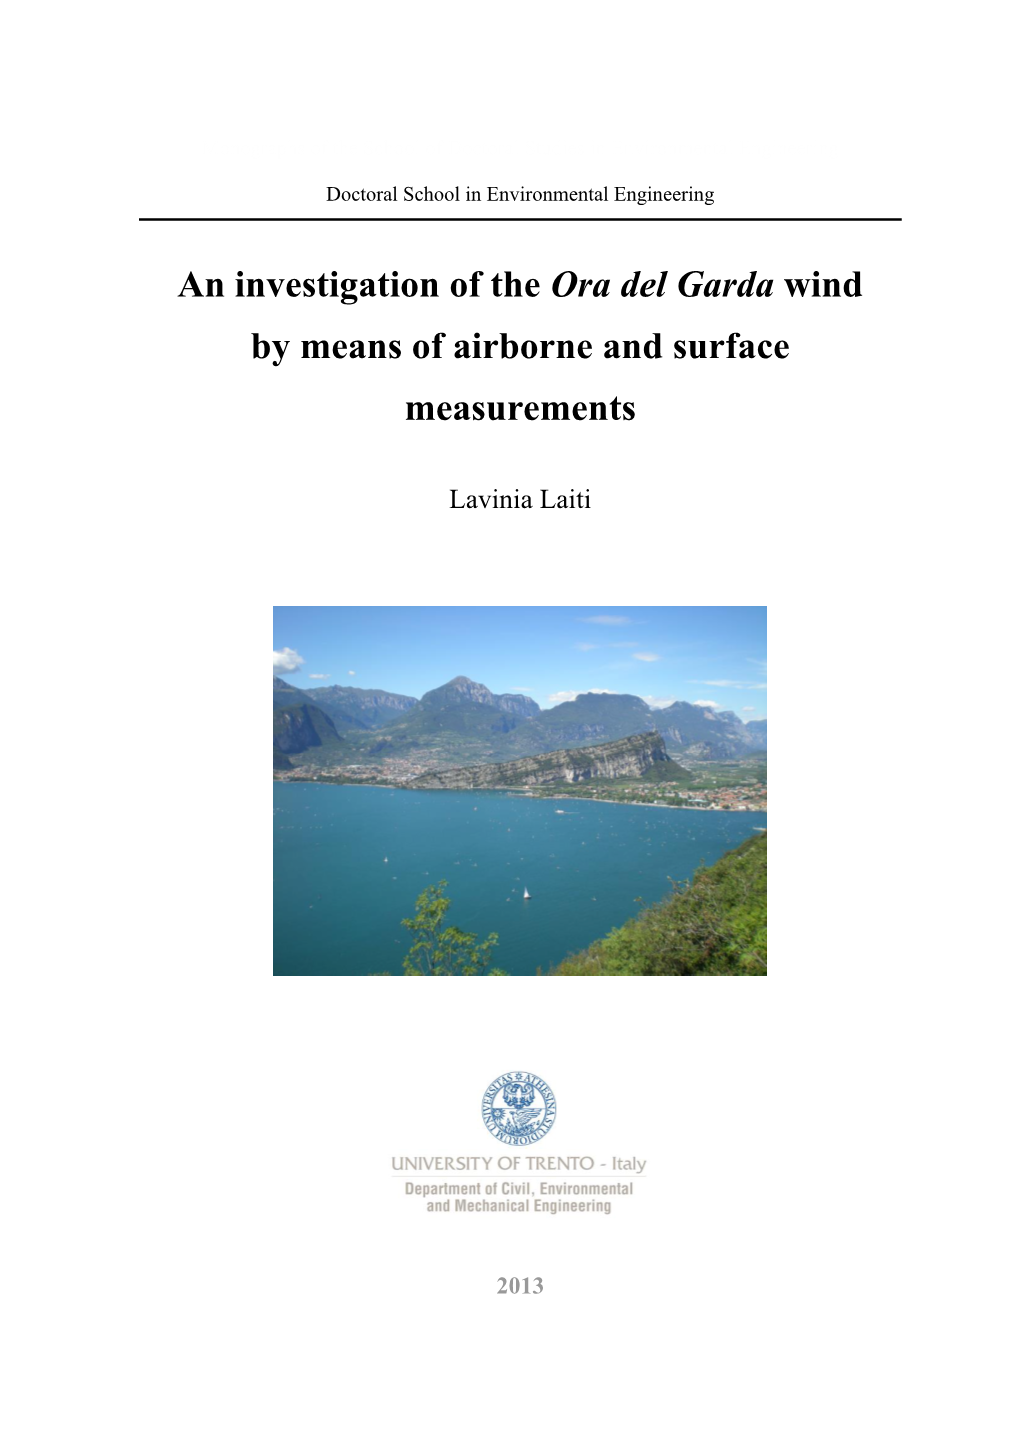 An Investigation of the Ora Del Garda Wind by Means of Airborne and Surface Measurements